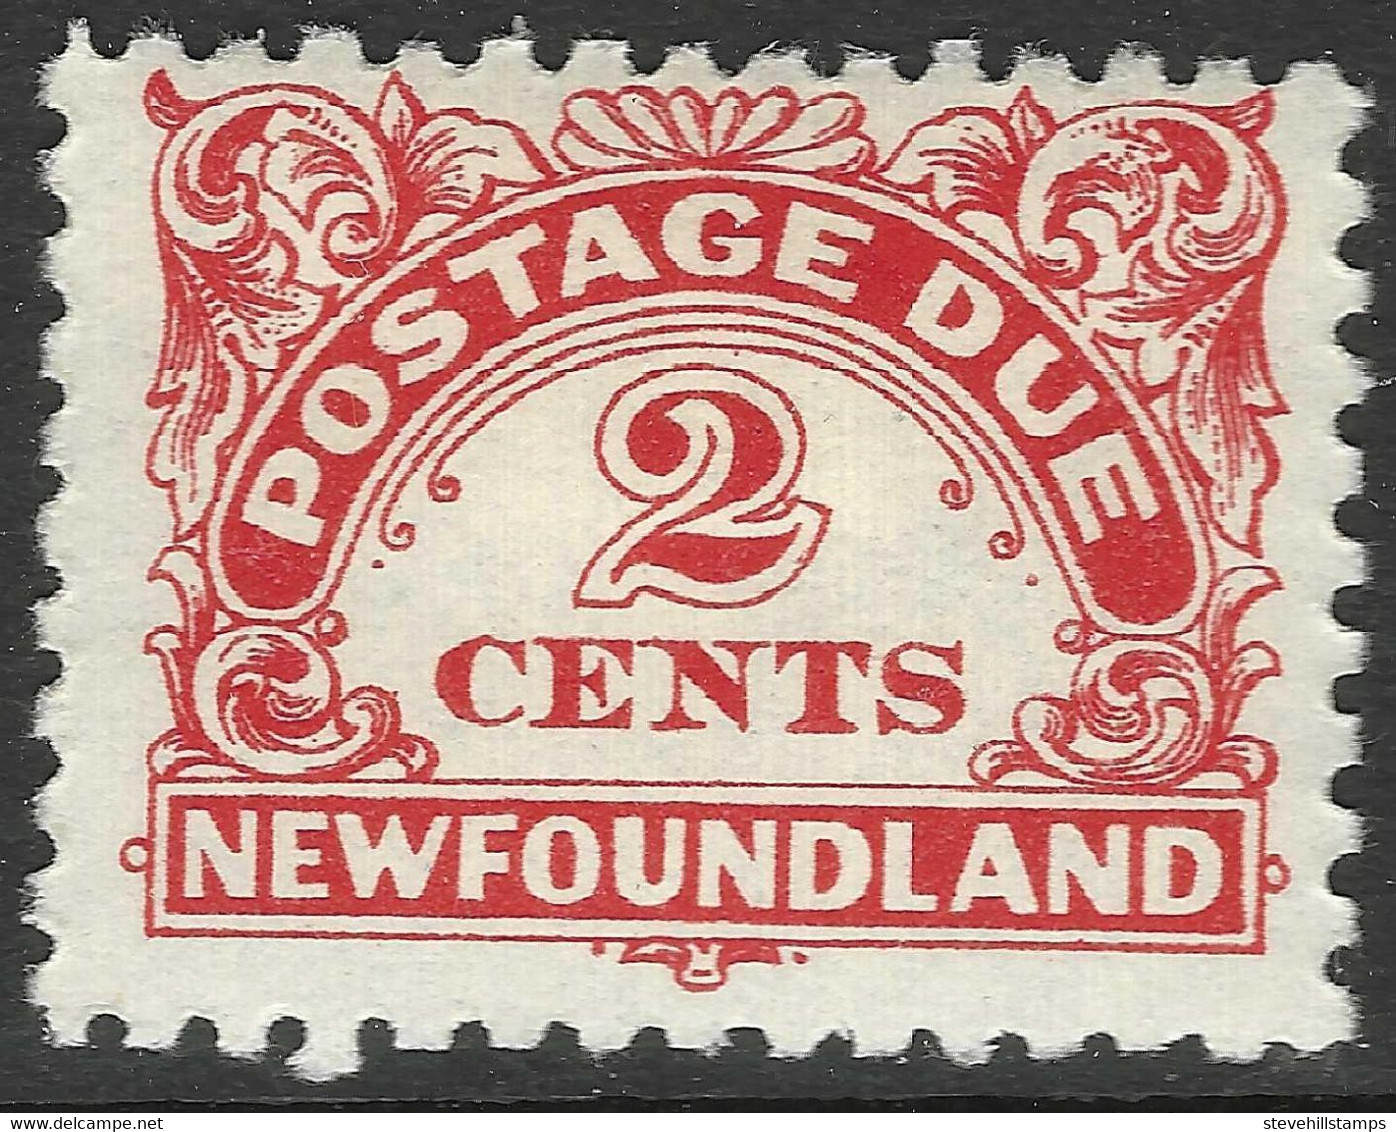 Newfoundland. 1939-49 Postage Due. P10 2c MH. SG D2 - Back Of Book